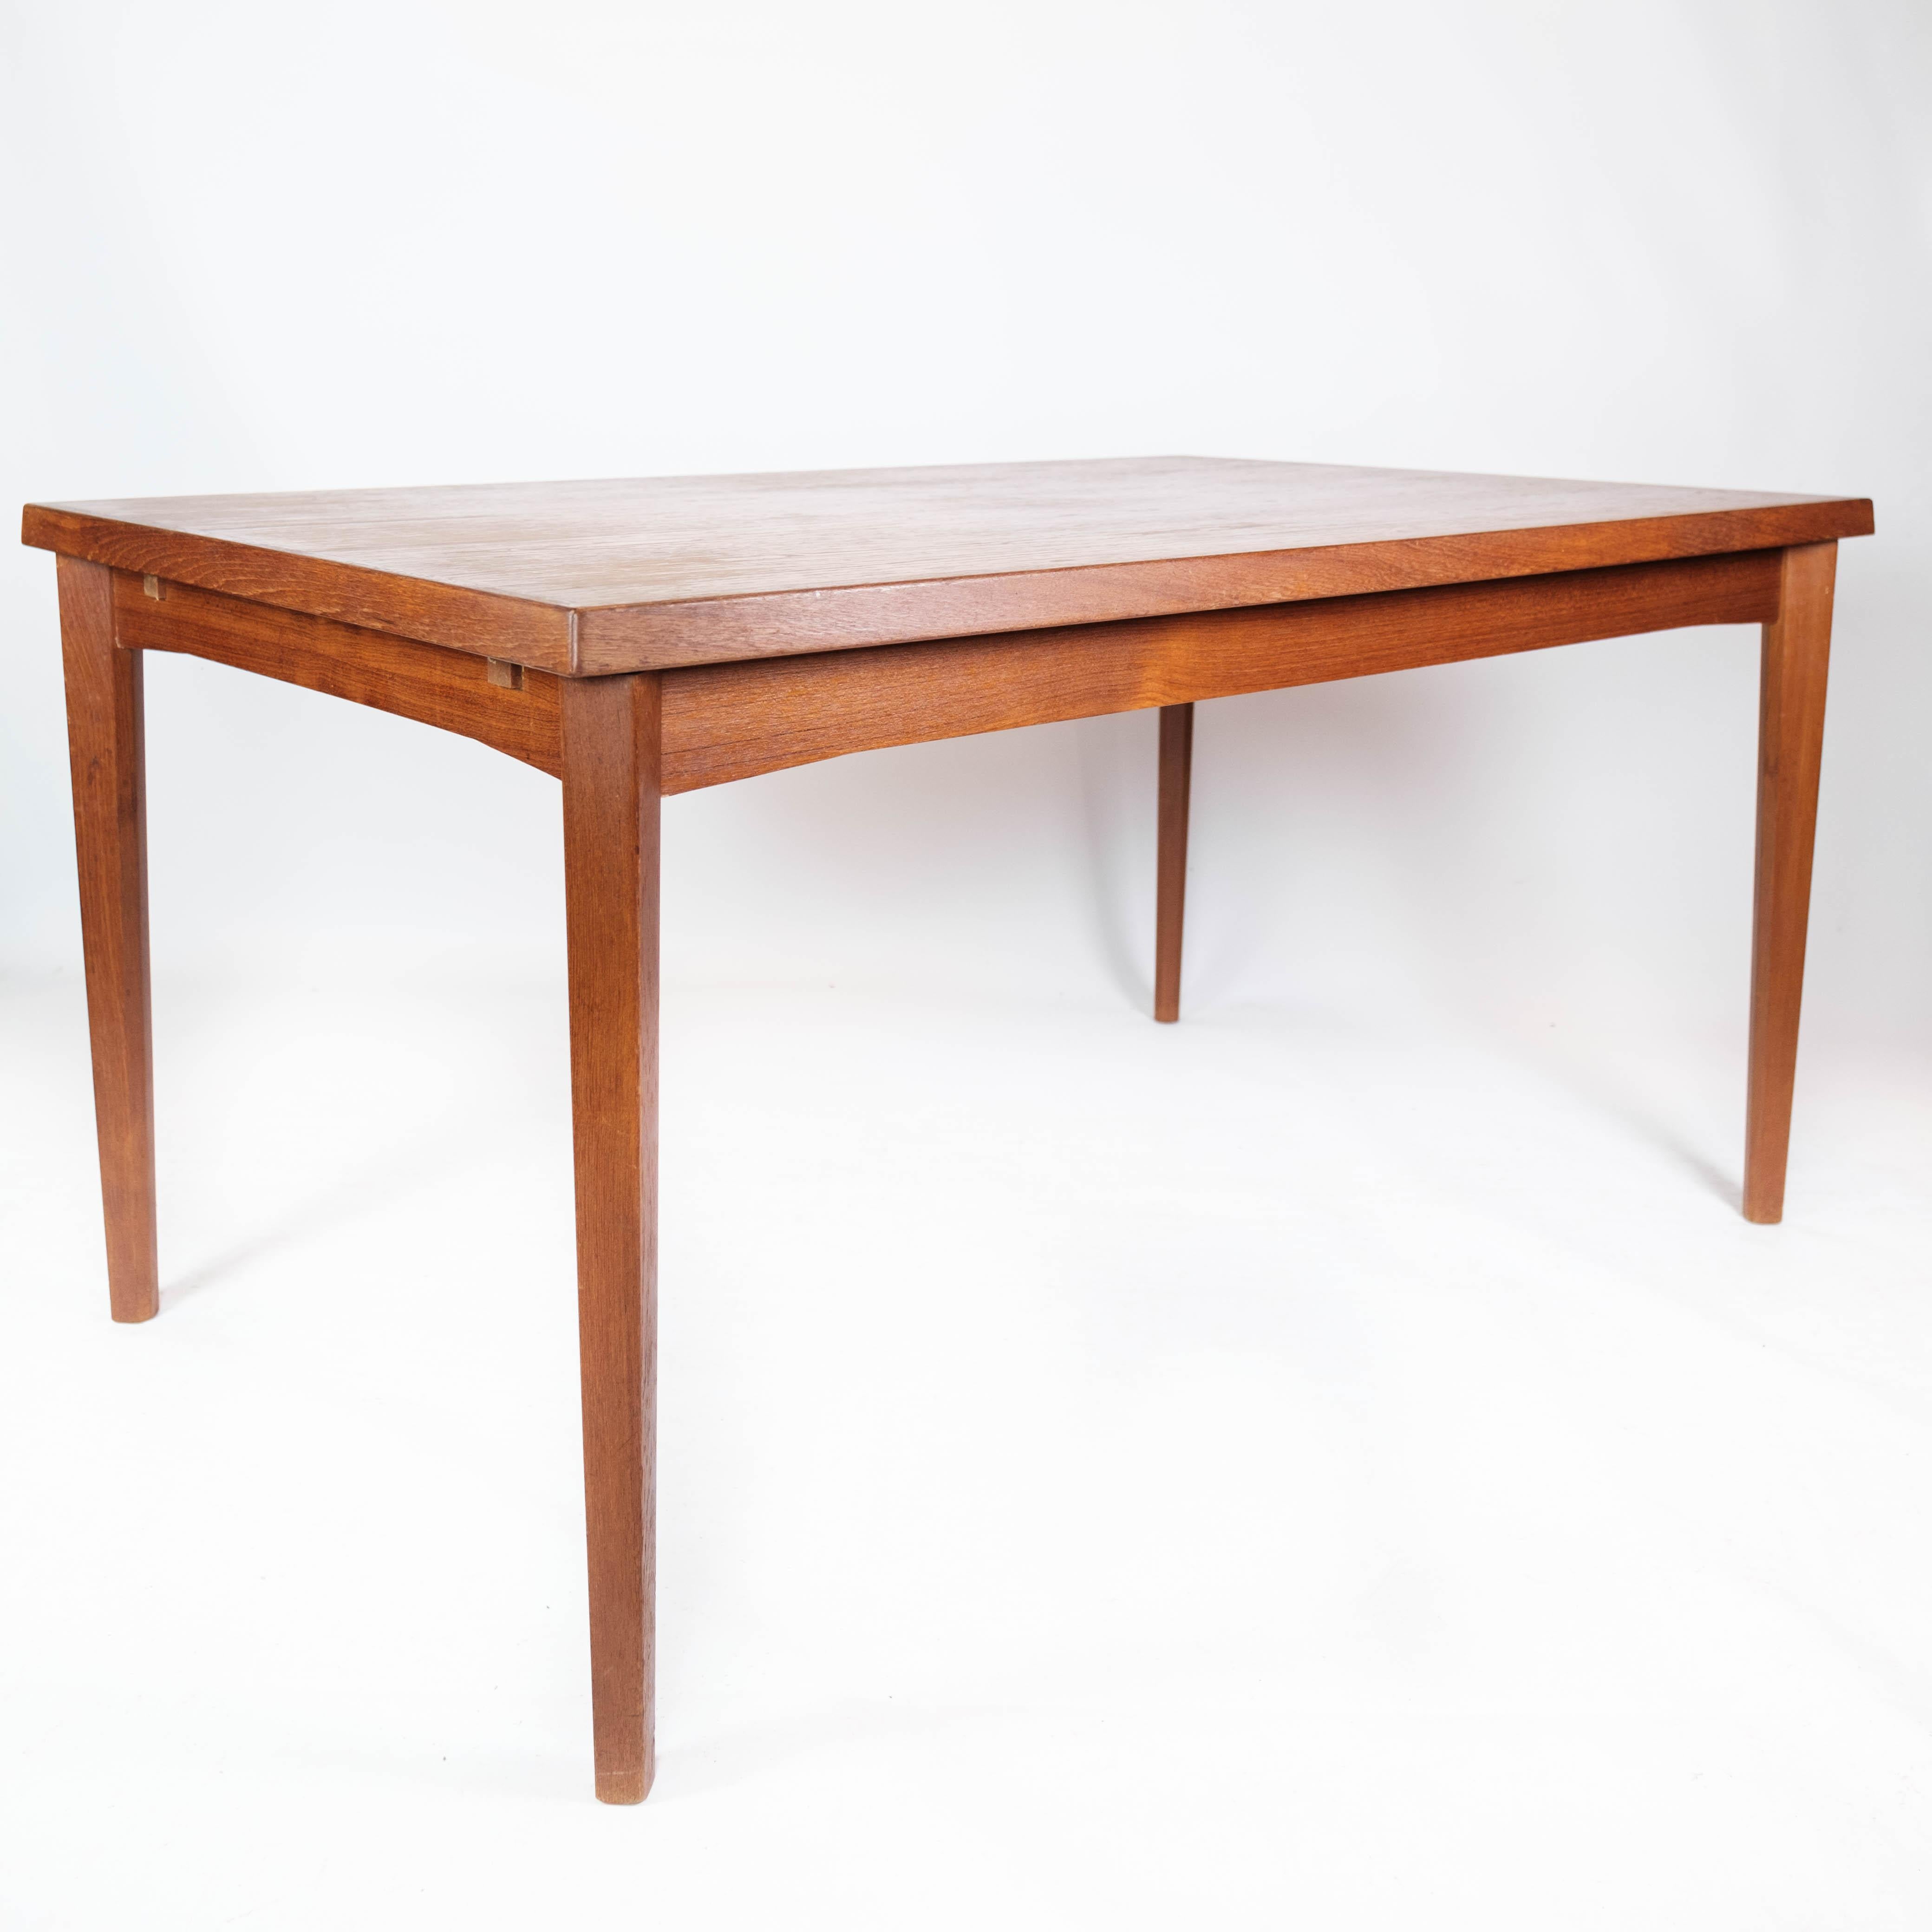 Dining Table in Teak with Extension Plates, of Danish Design from the 1960s For Sale 1